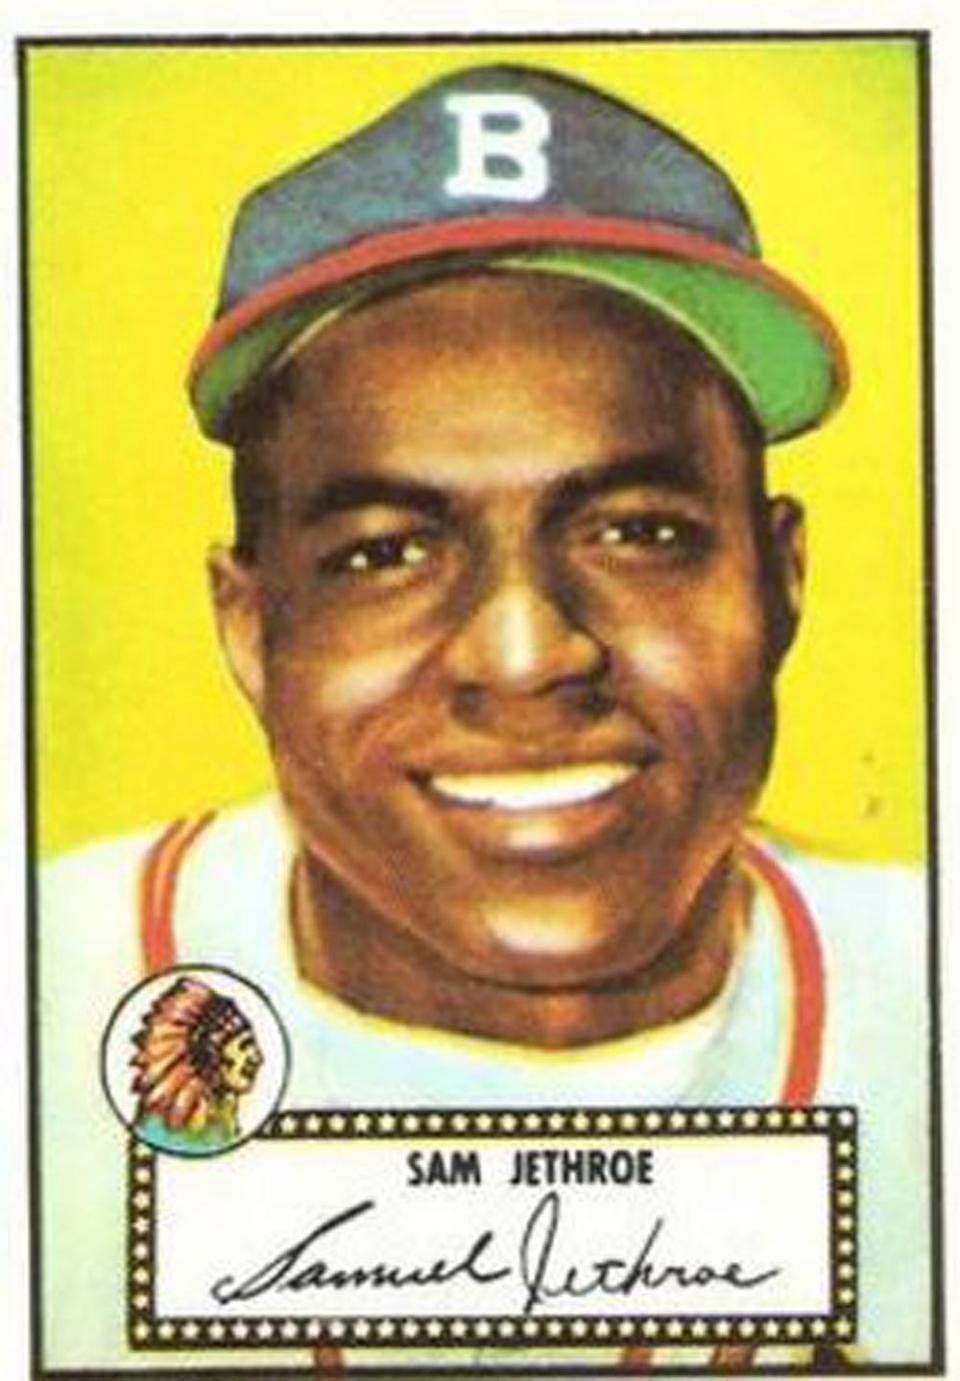 Sam Jethroe is pictured on his 1952 Topps baseball card.